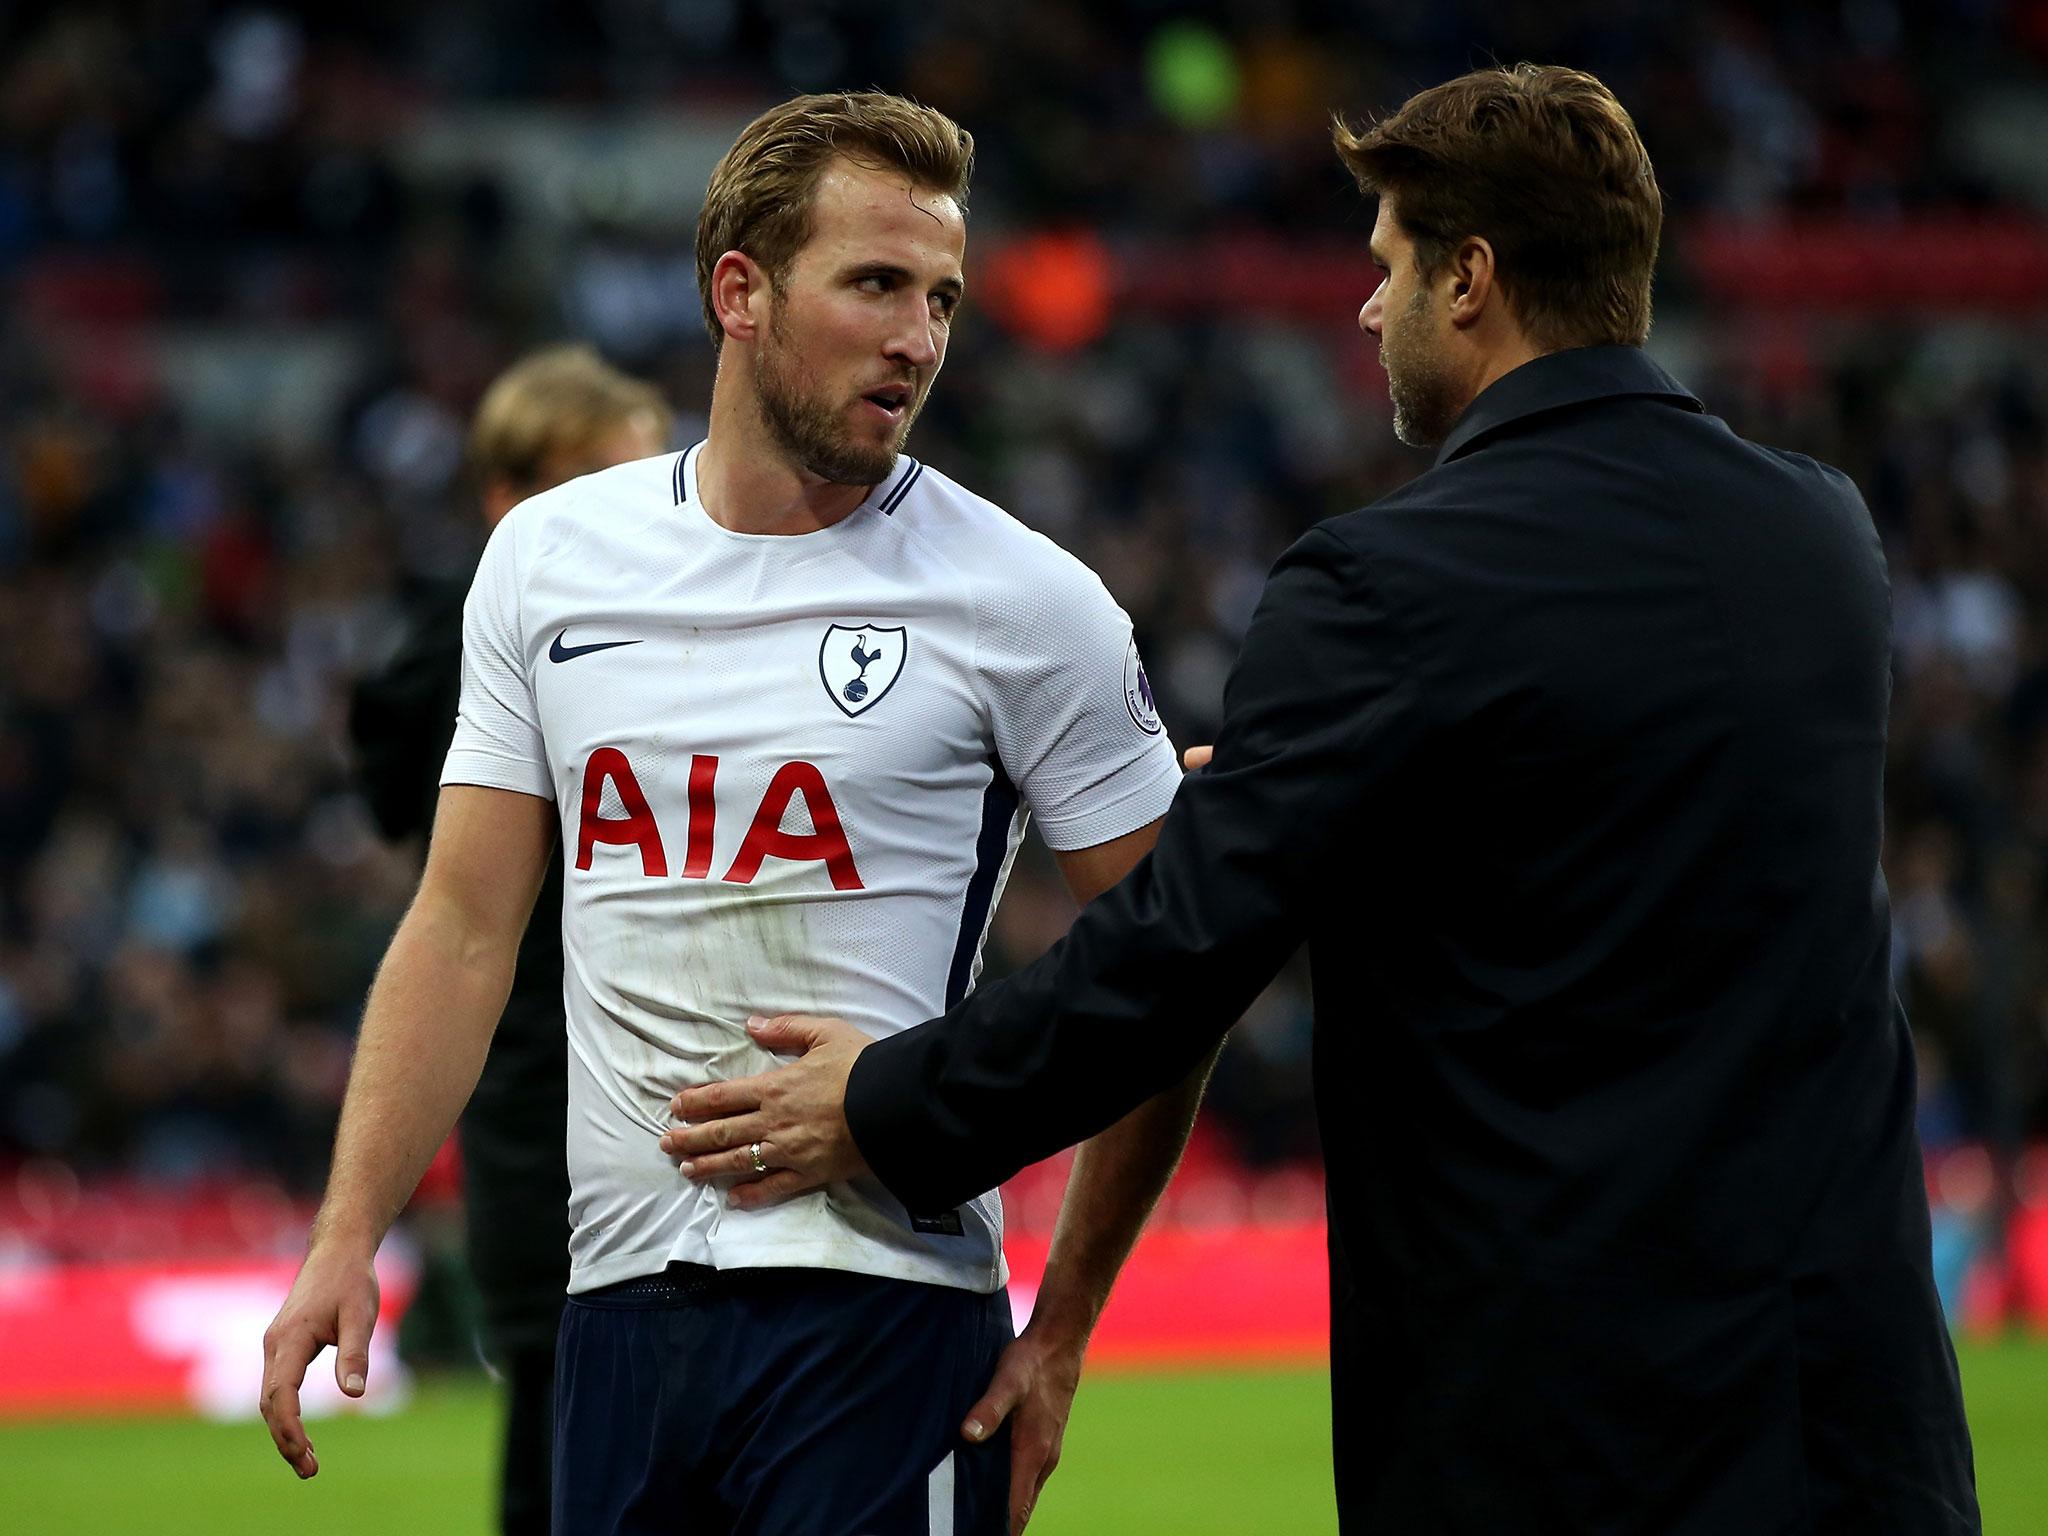 Harry Kane was brought off at the end of Tottenham's win over Liverpool due to fatigue